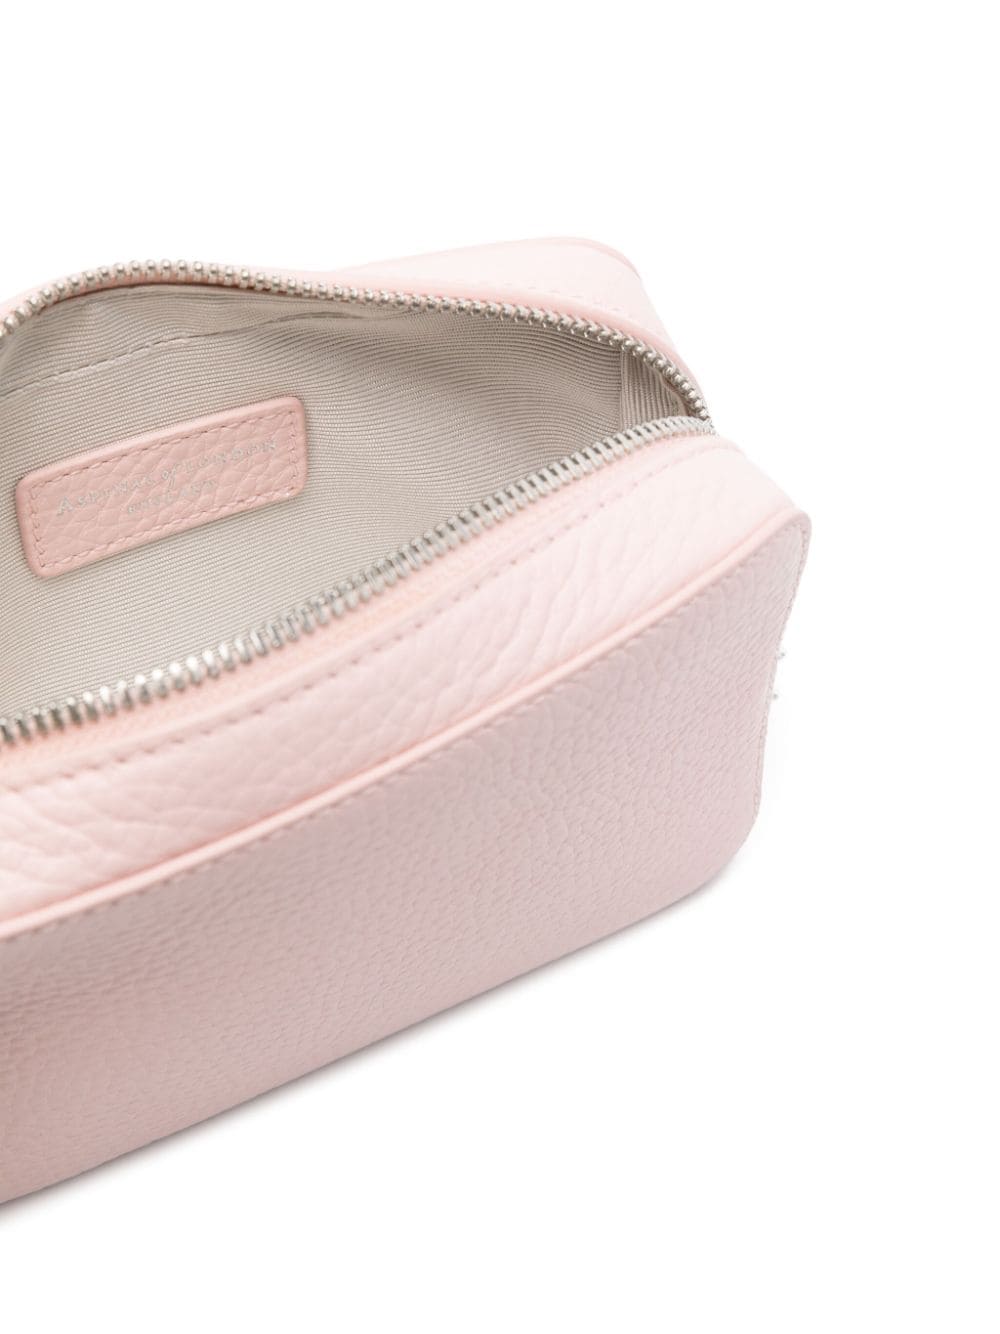 Shop Aspinal Of London Milly Cross Body Bag In Pink